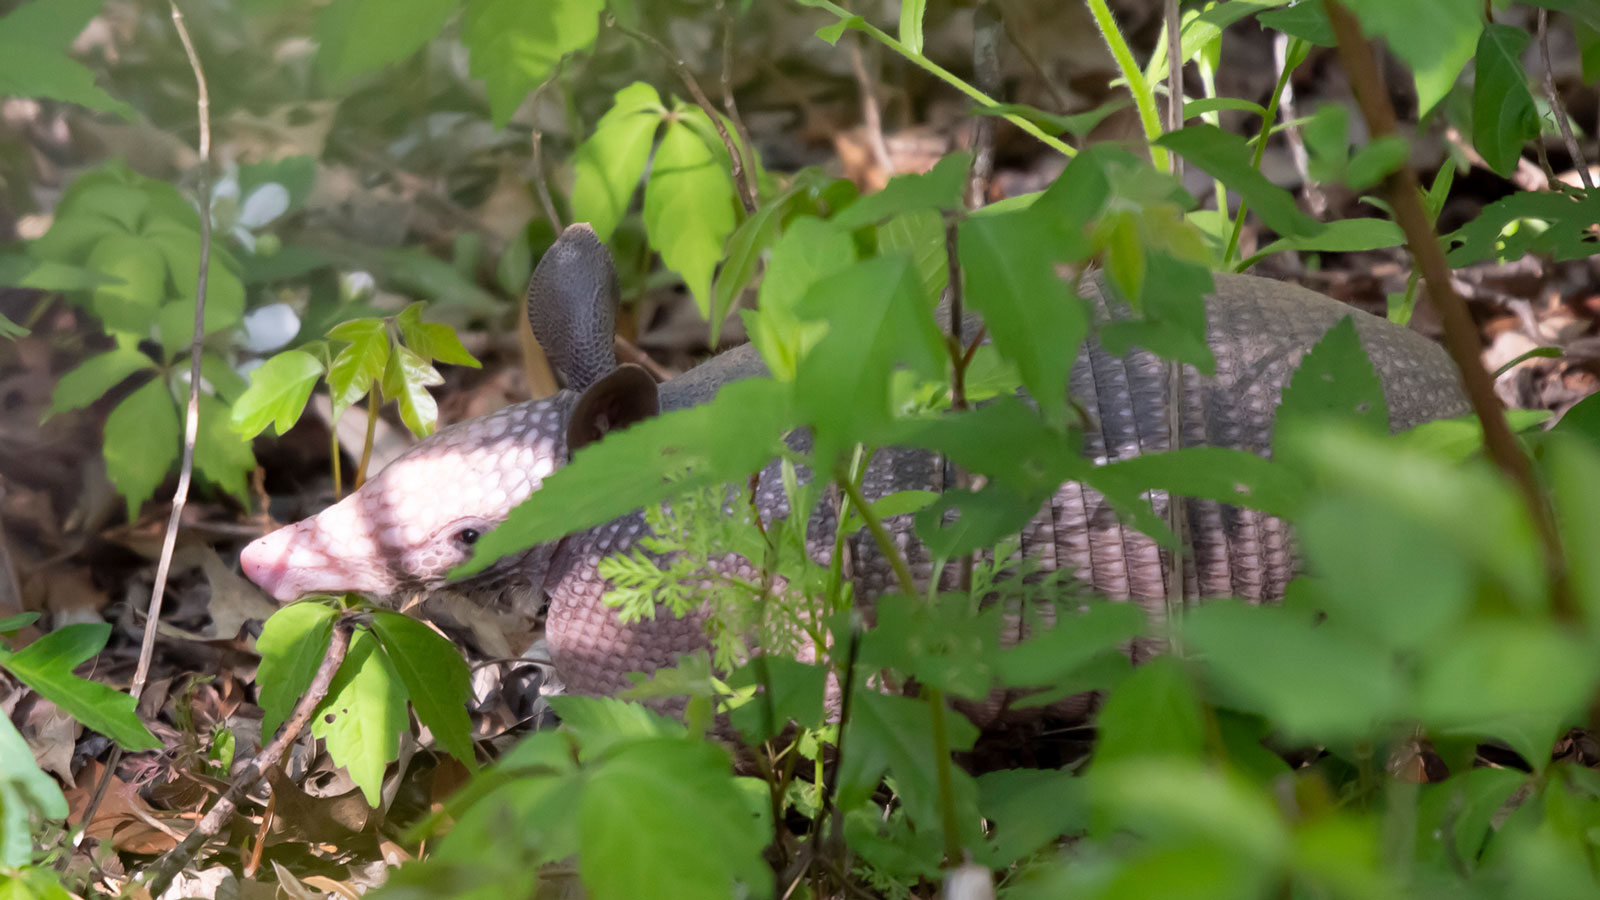 Nine-Banded armadillo partially hidden behind leaves